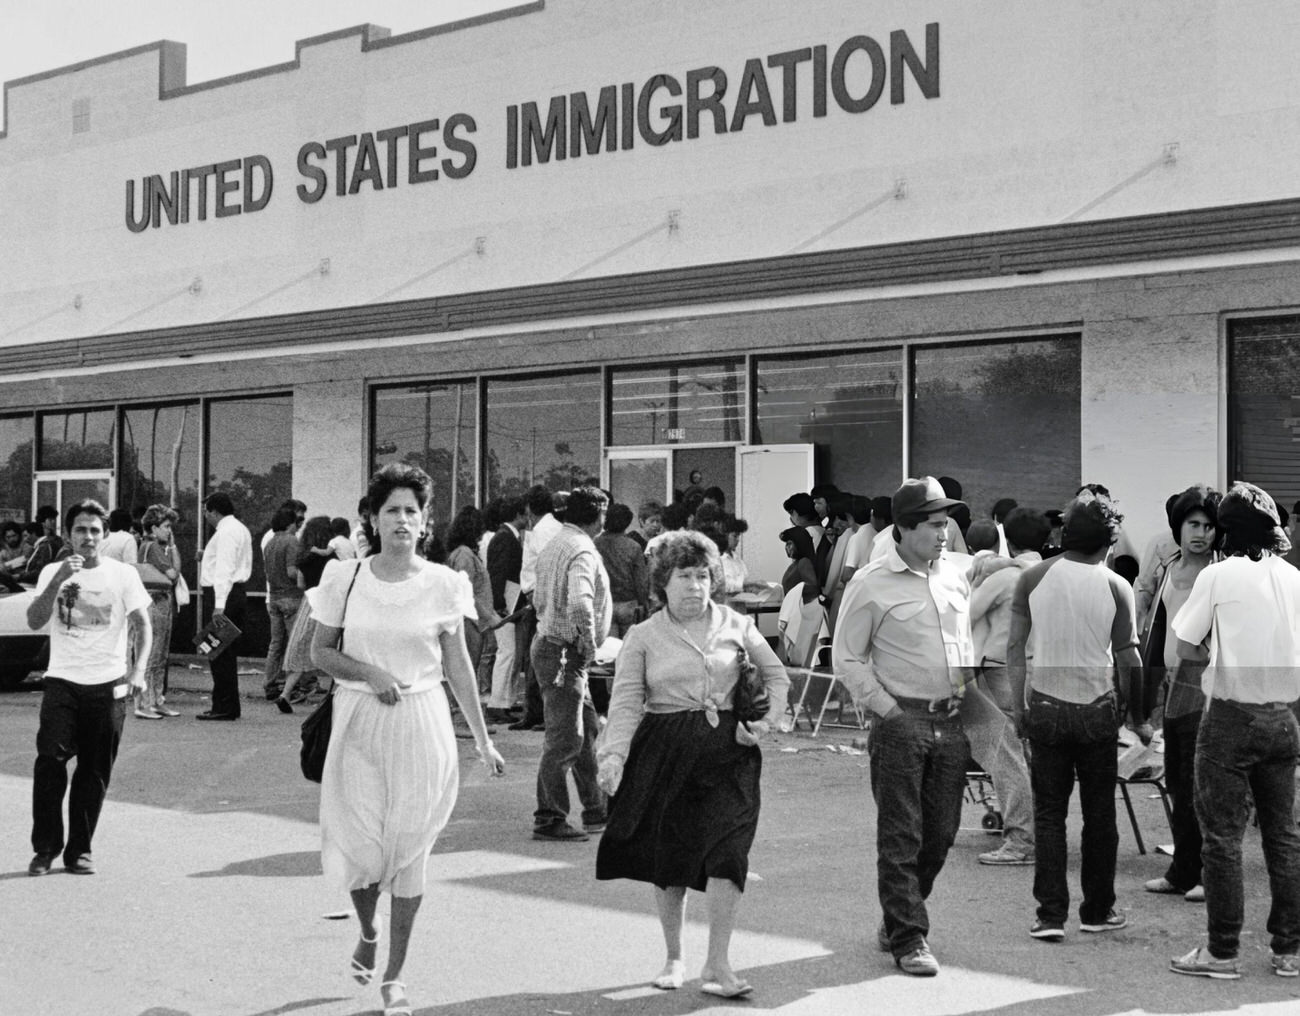 Undocumented individuals line up at the U.S. Immigration and Naturalization Service office before the amnesty period ends, Houston, Texas, May 1, 1988.